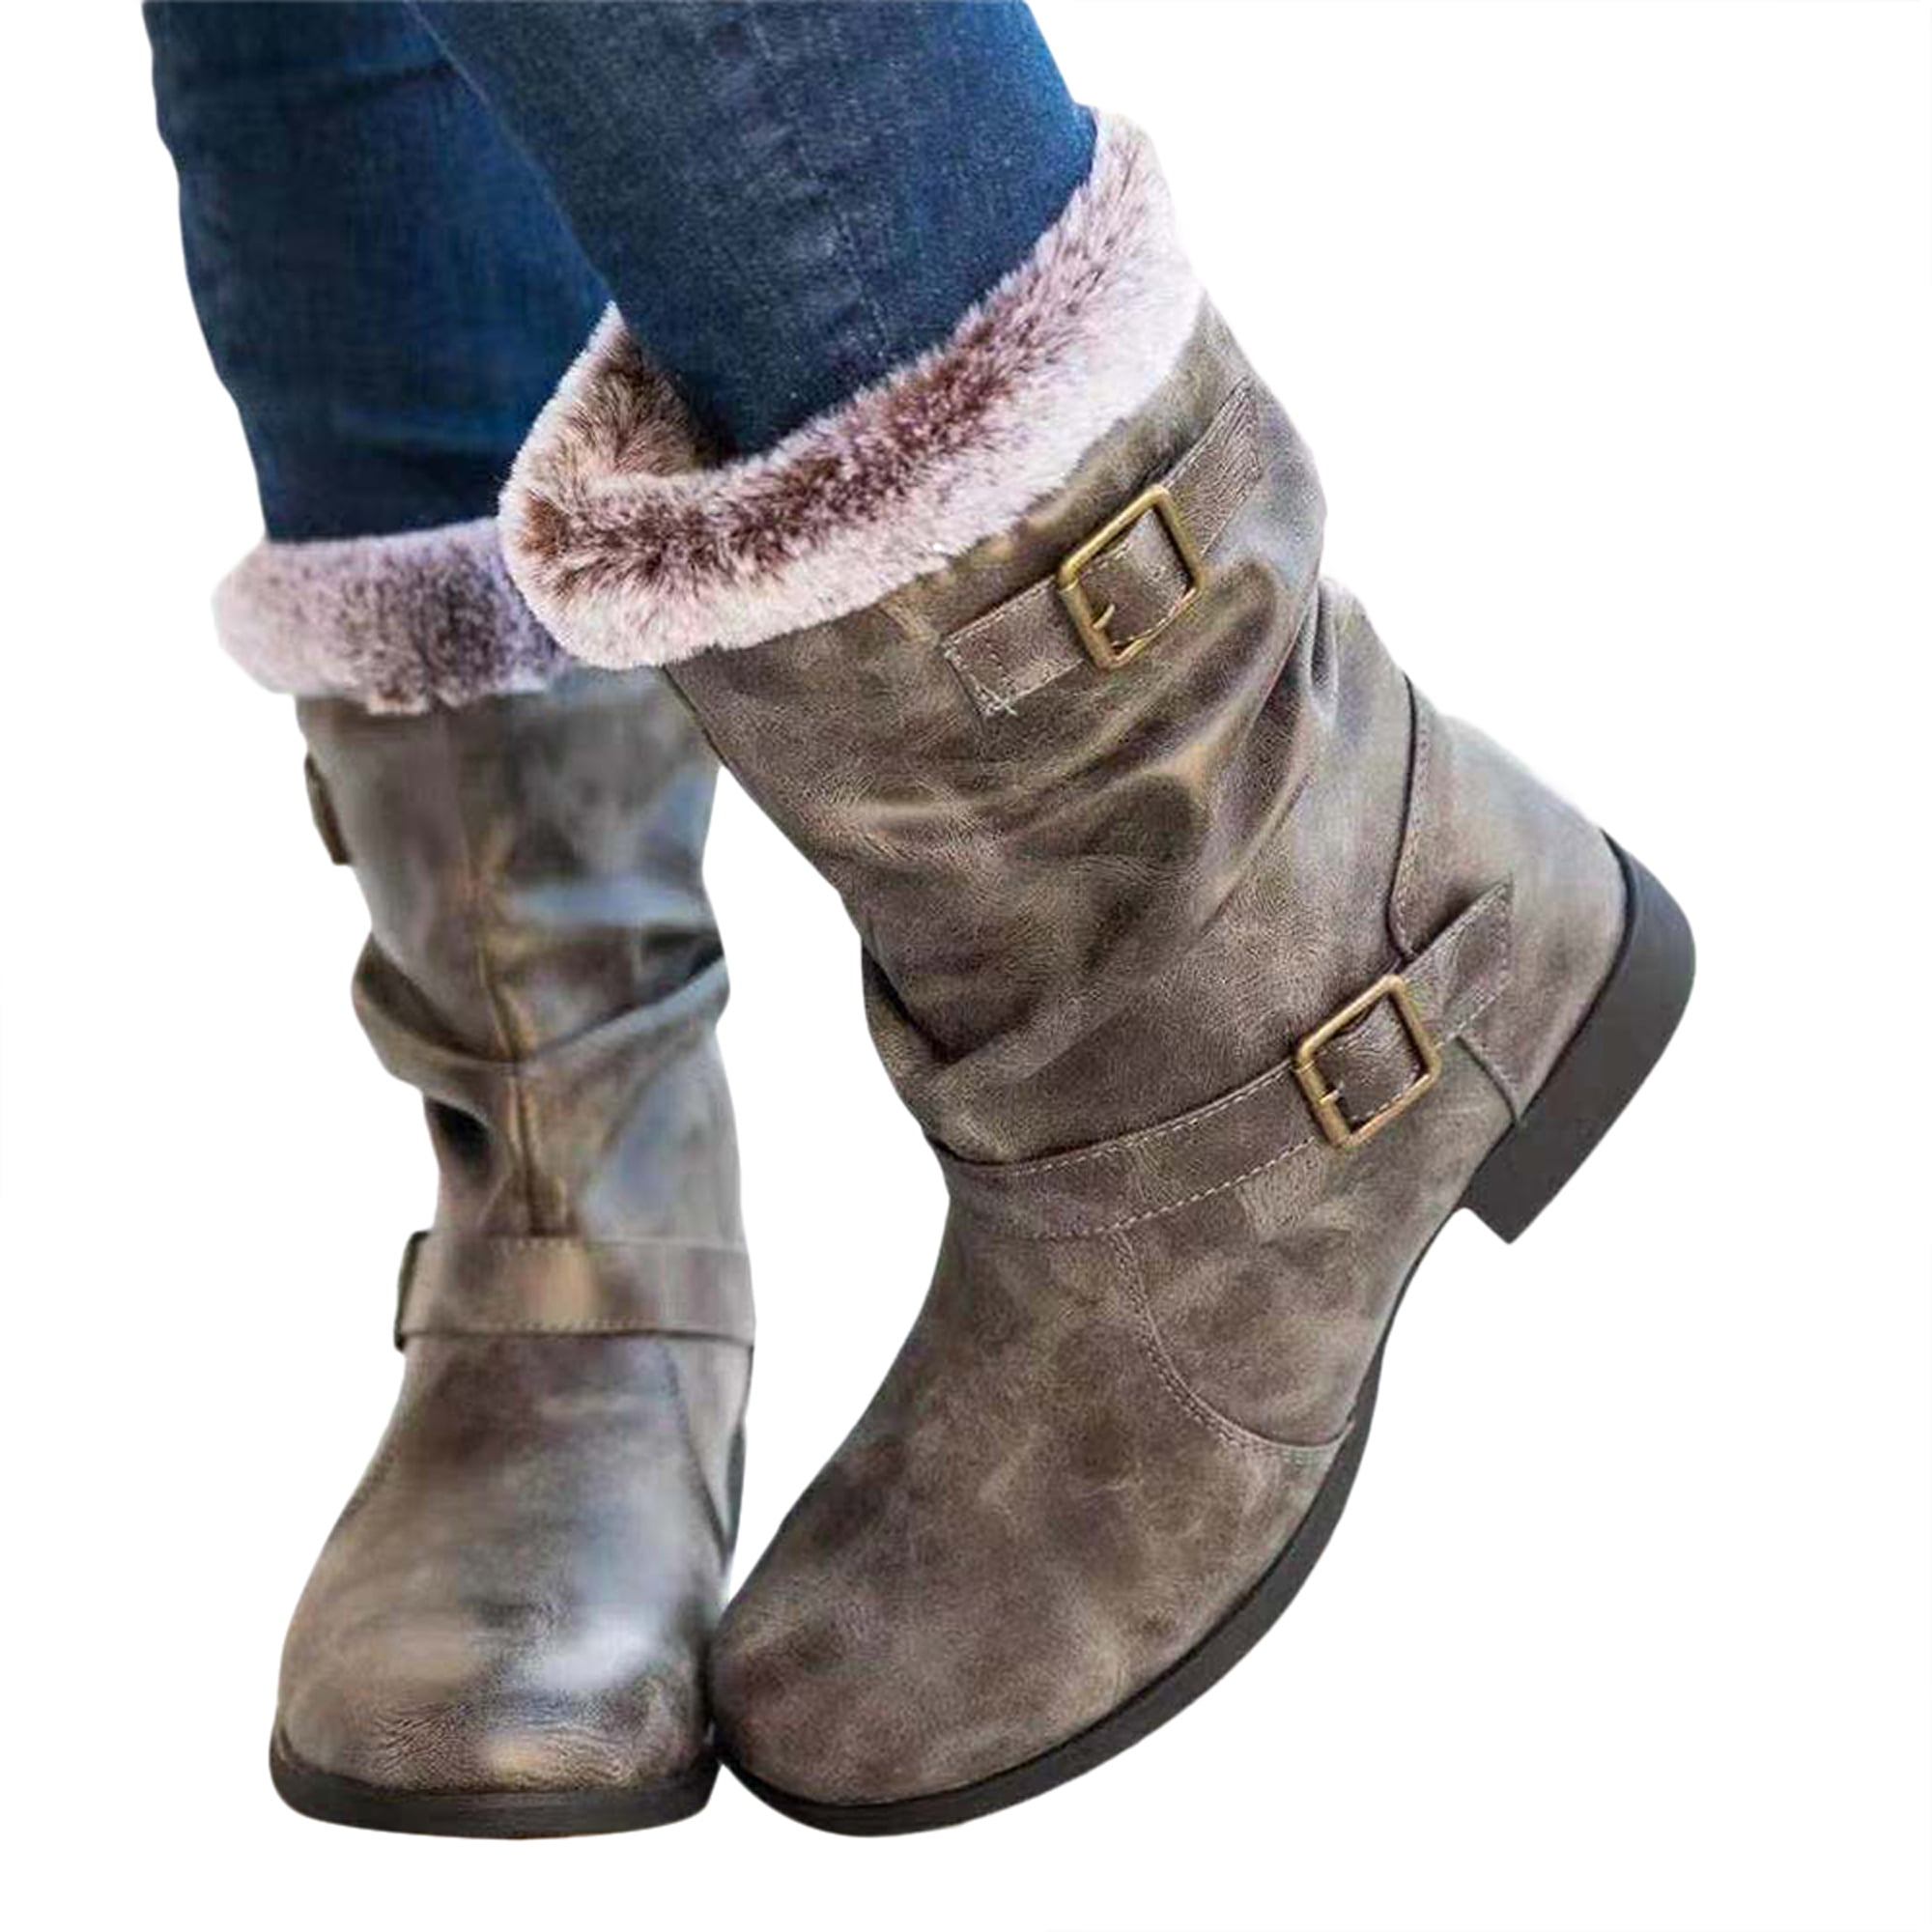 Women's Winter Warm Faux Suede Buckle Button Mid Calf Boot Shoes Size 5.5-10